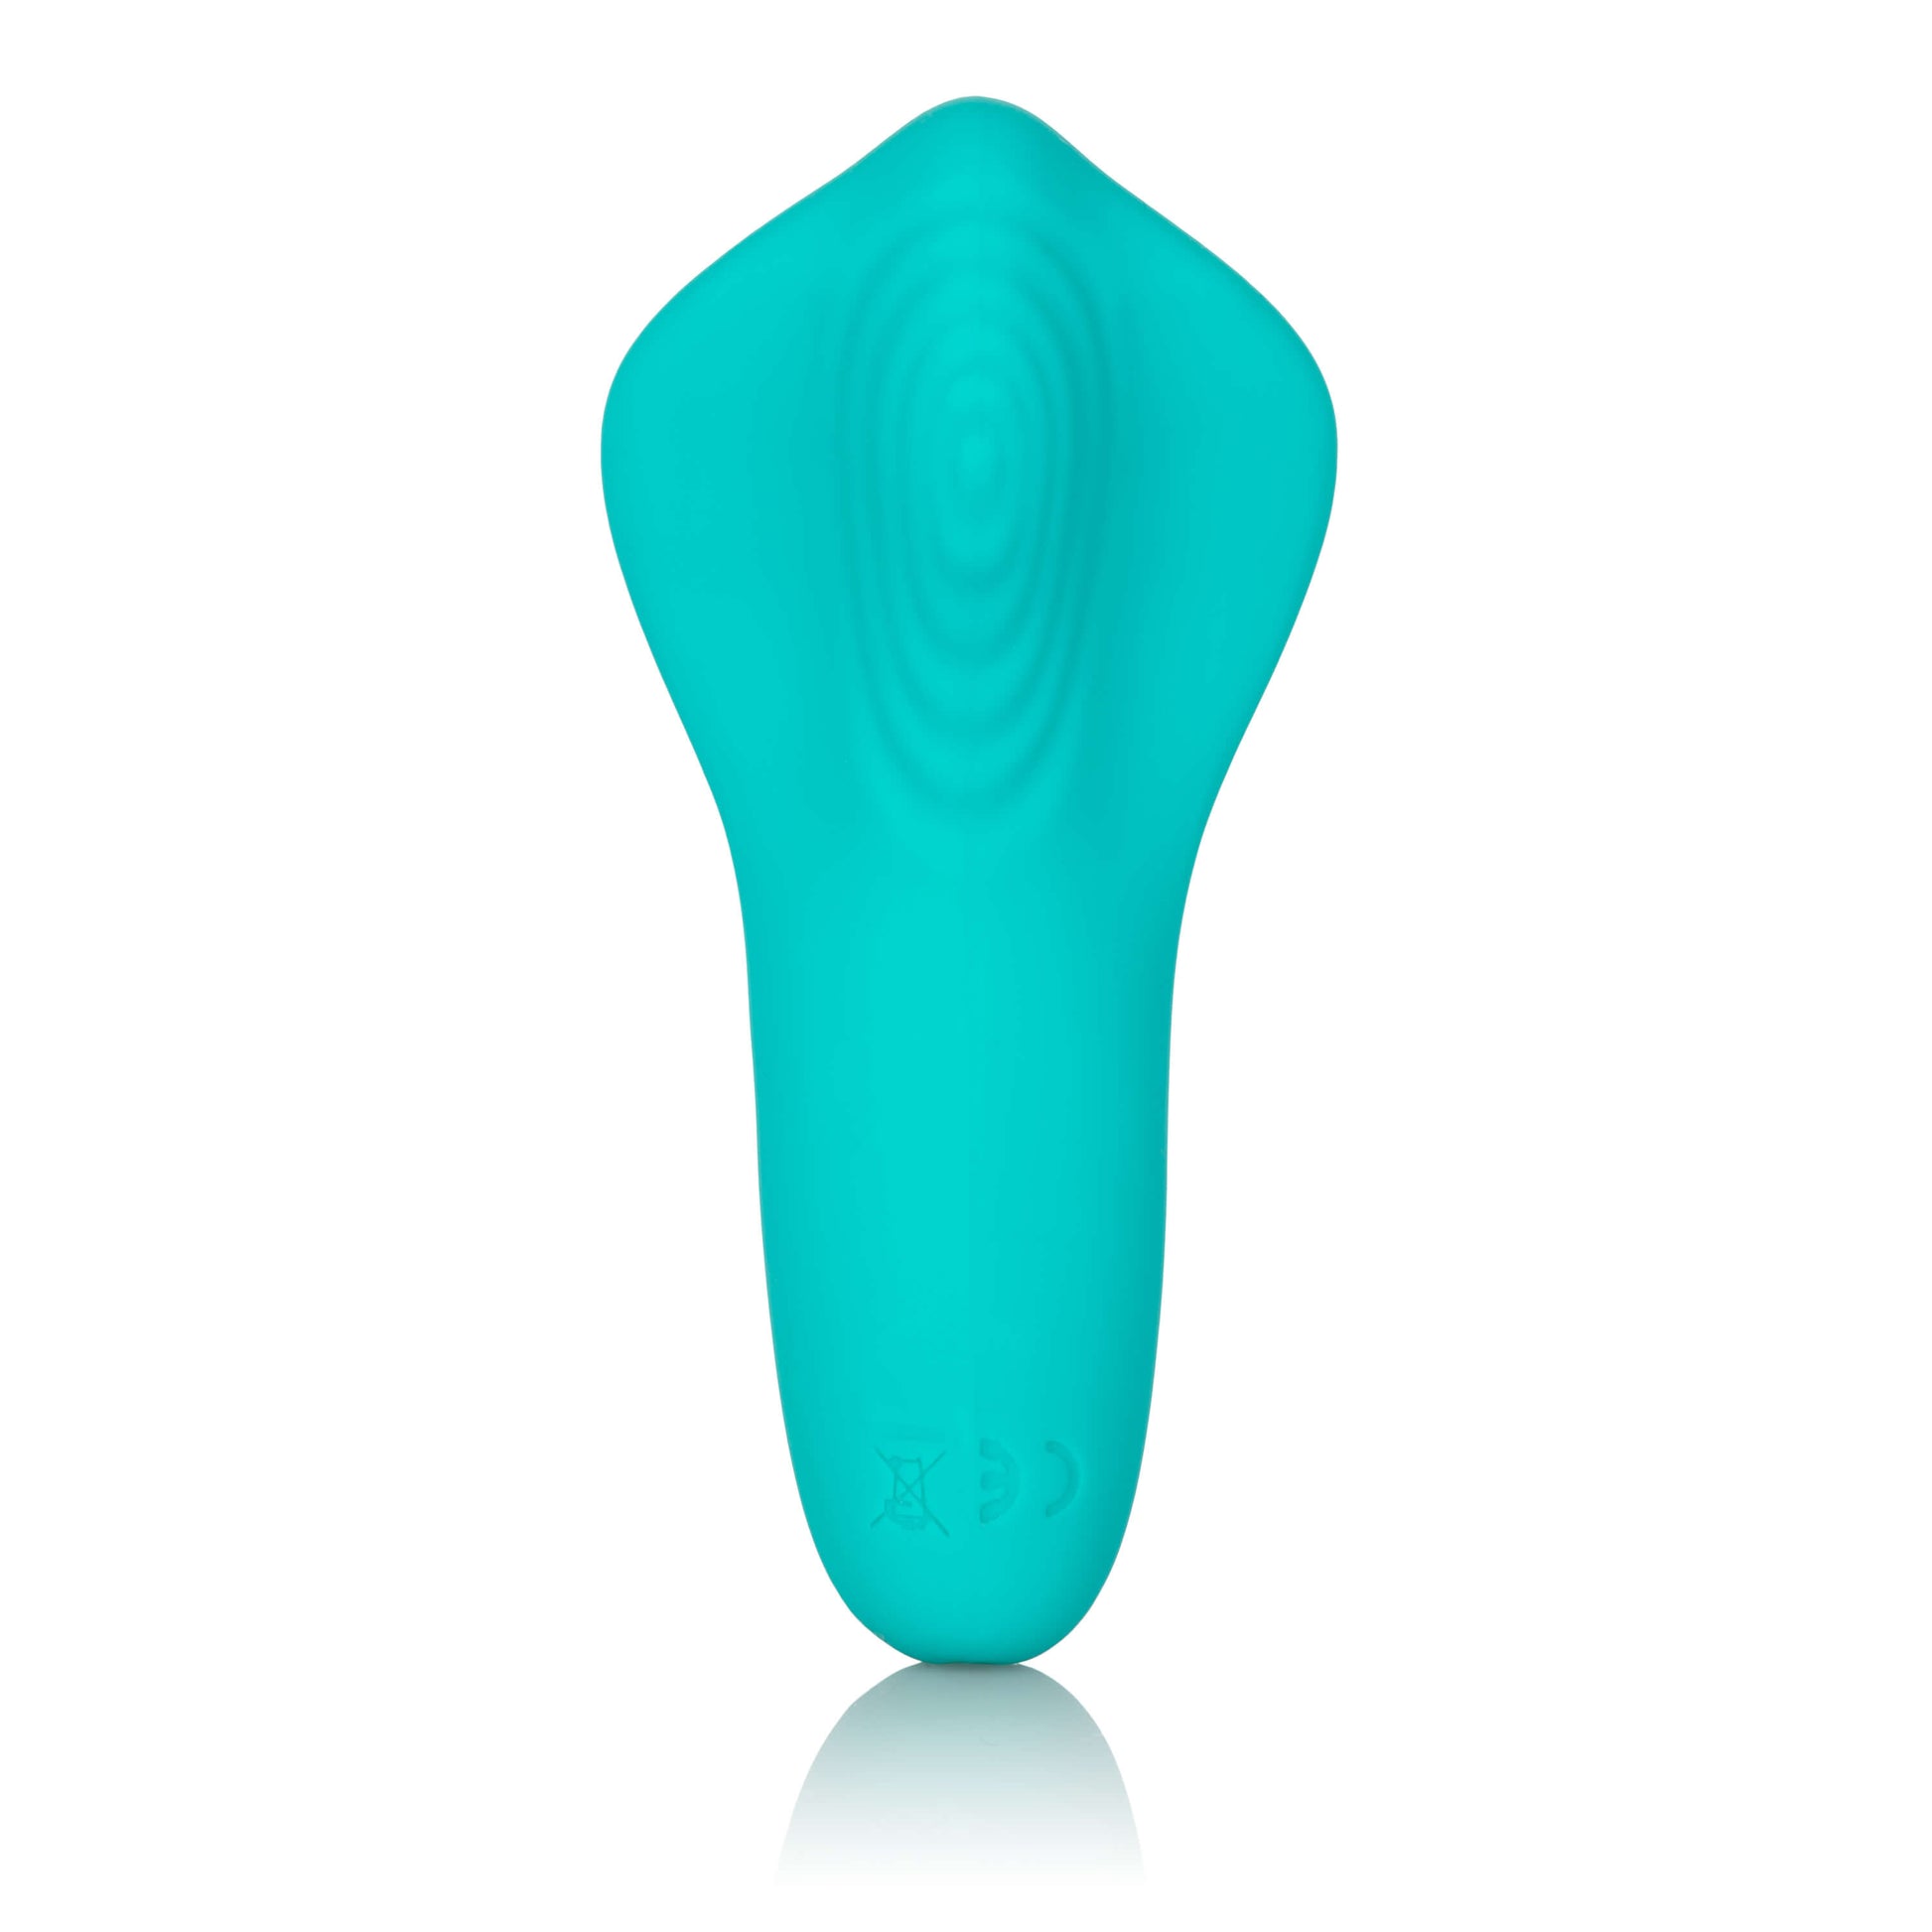 Slay Pleaser Vibrator - CalExotics - by The Bigger O - an online sex toy shop. We ship to USA, Canada and the UK.